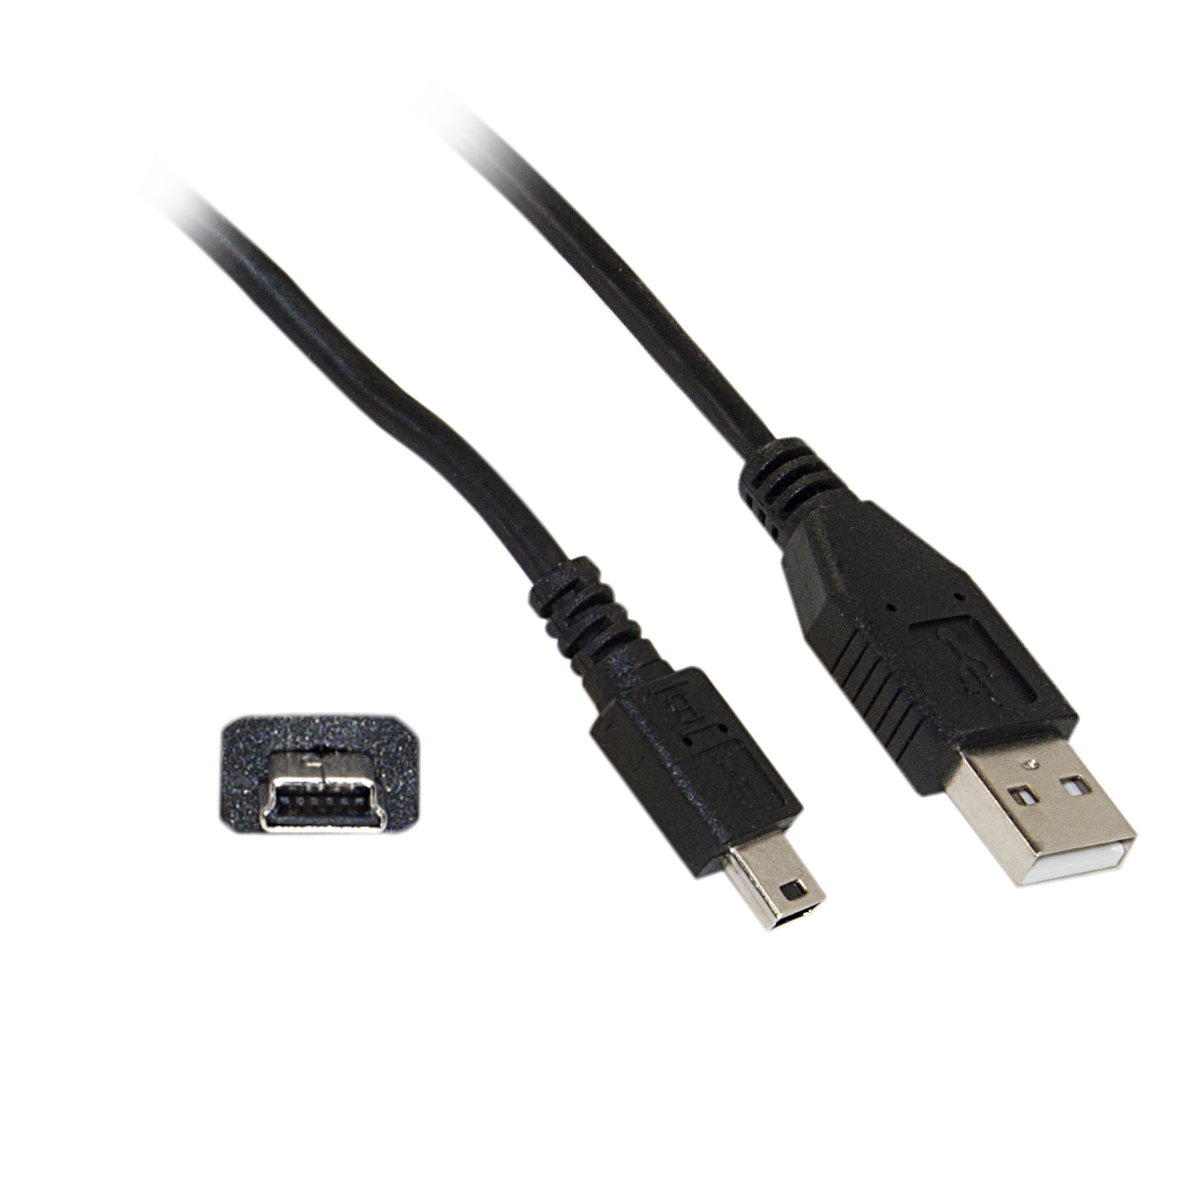 10ft Digital Video Camera USB Cable, USB Type A to Mini B